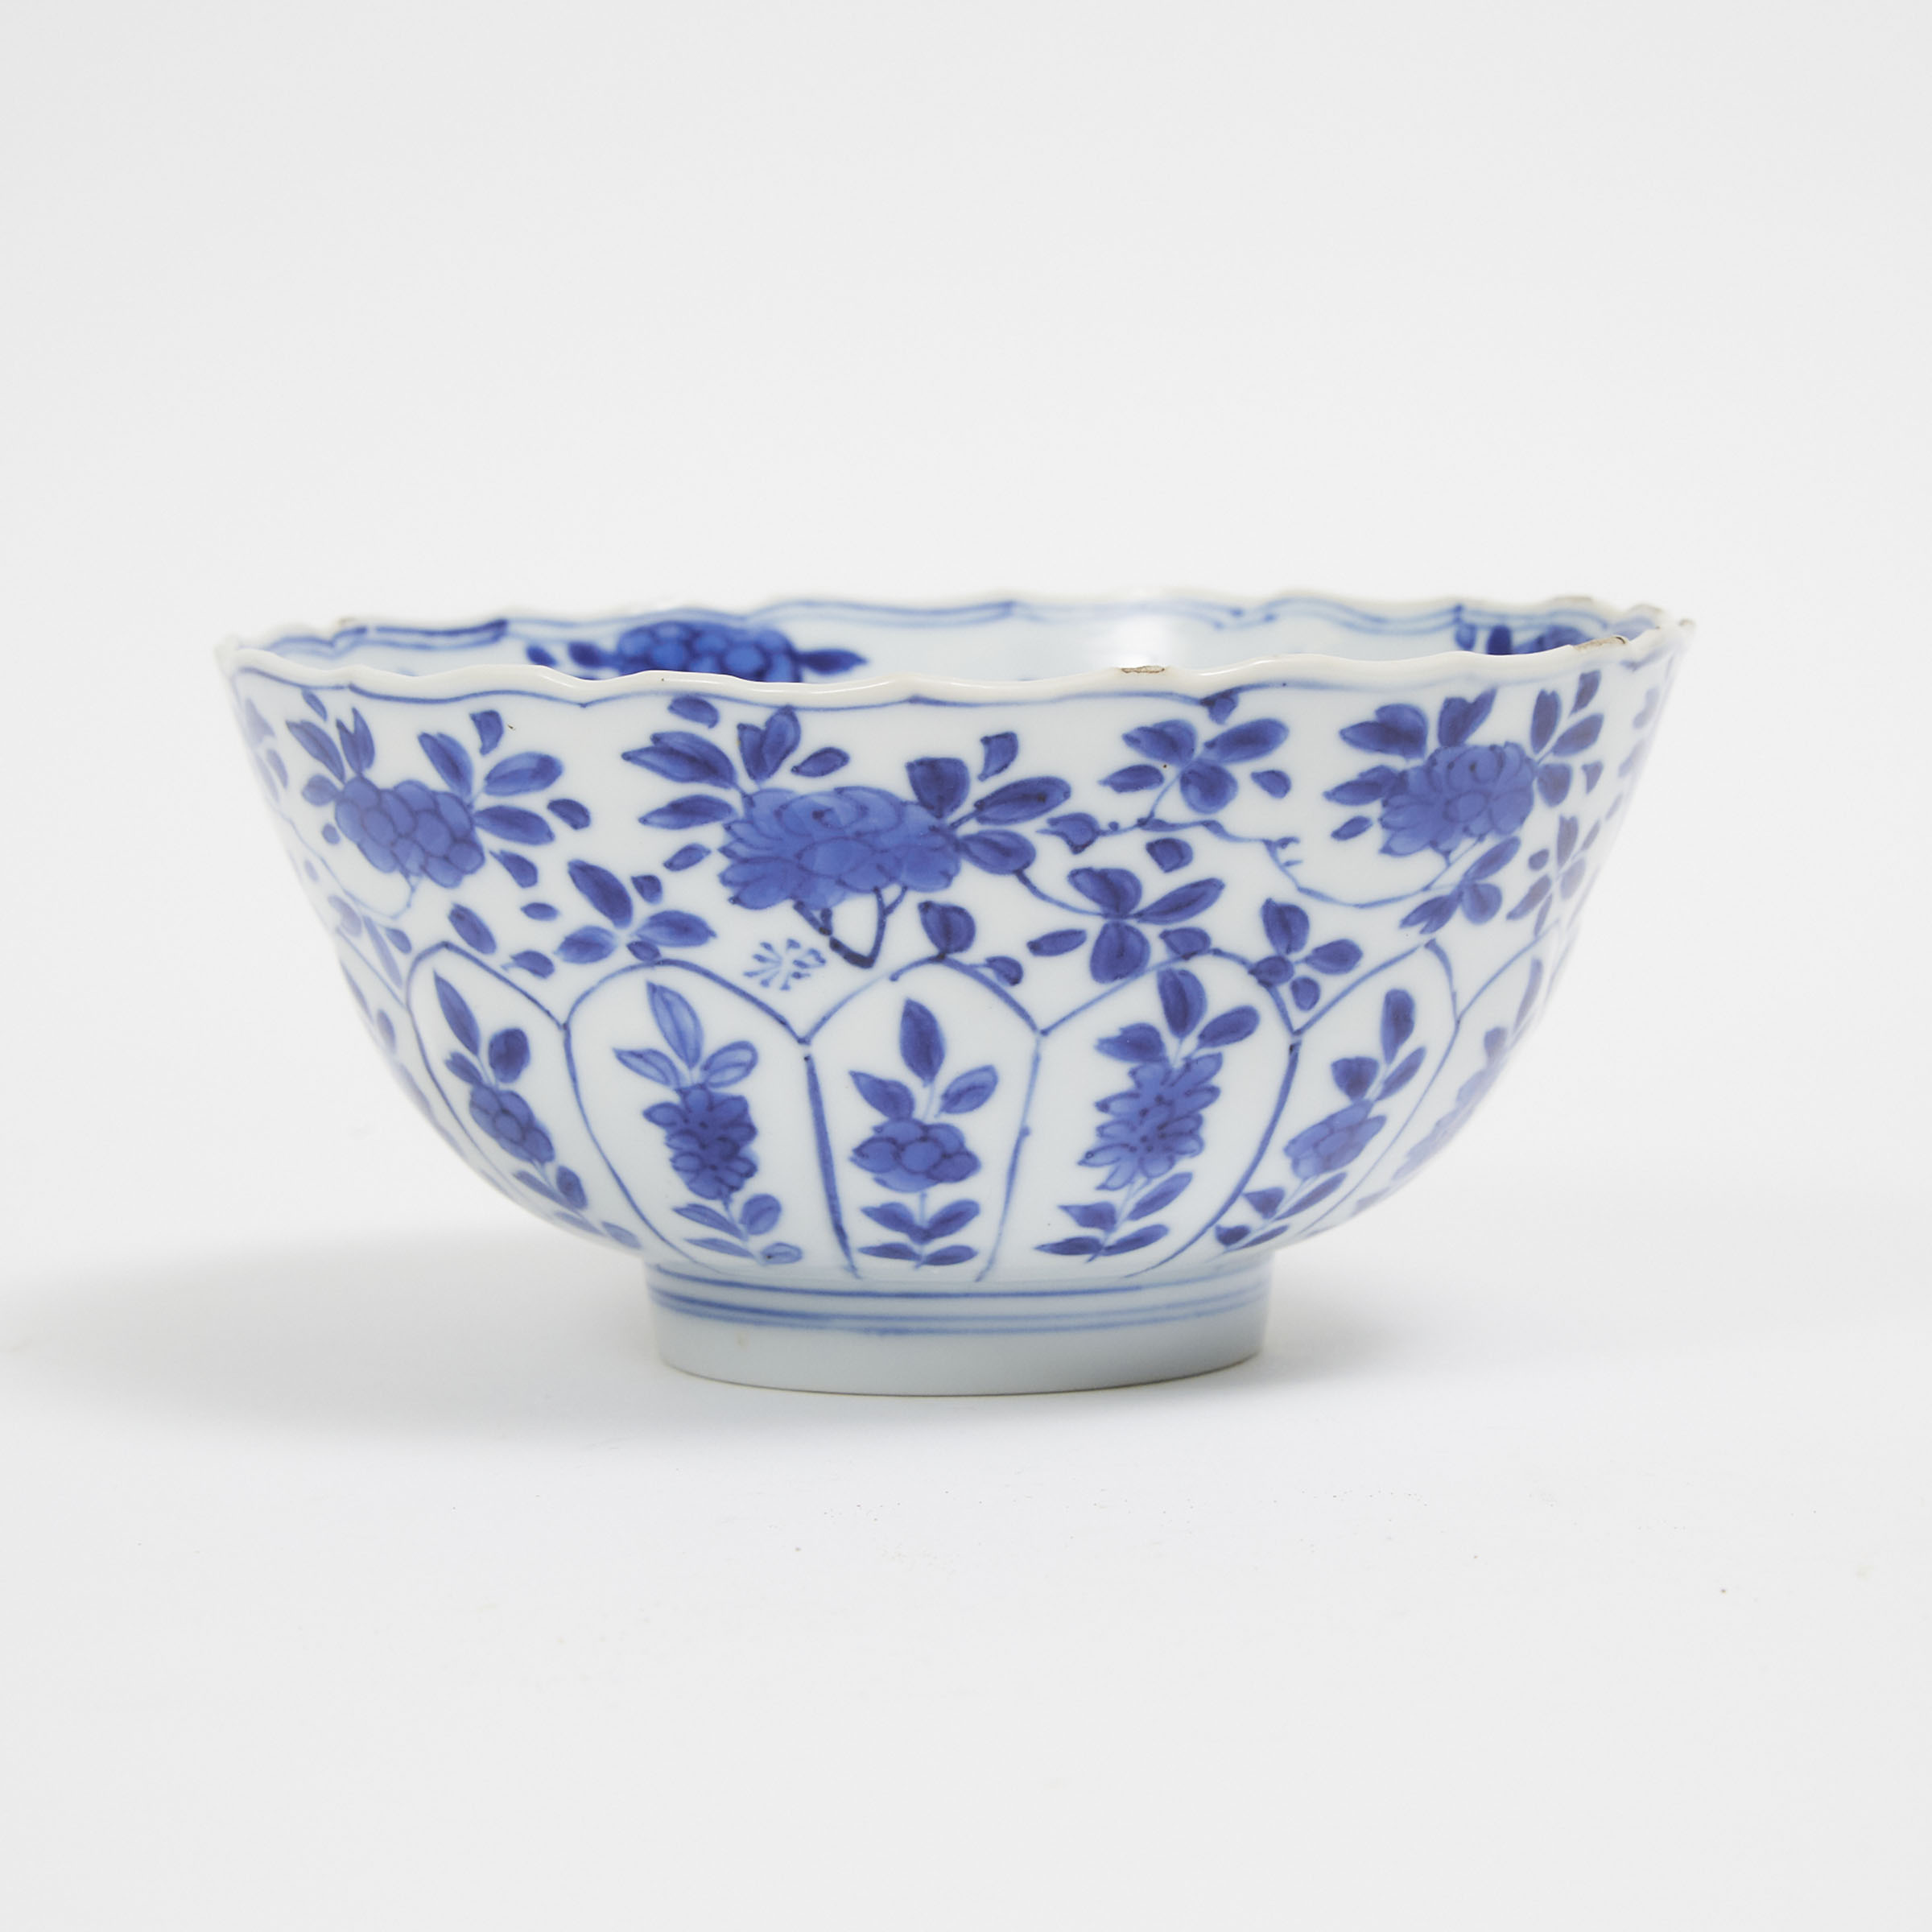 A Blue and White Barbed-Rim Bowl, Kangxi Mark and Period (1662-1722)